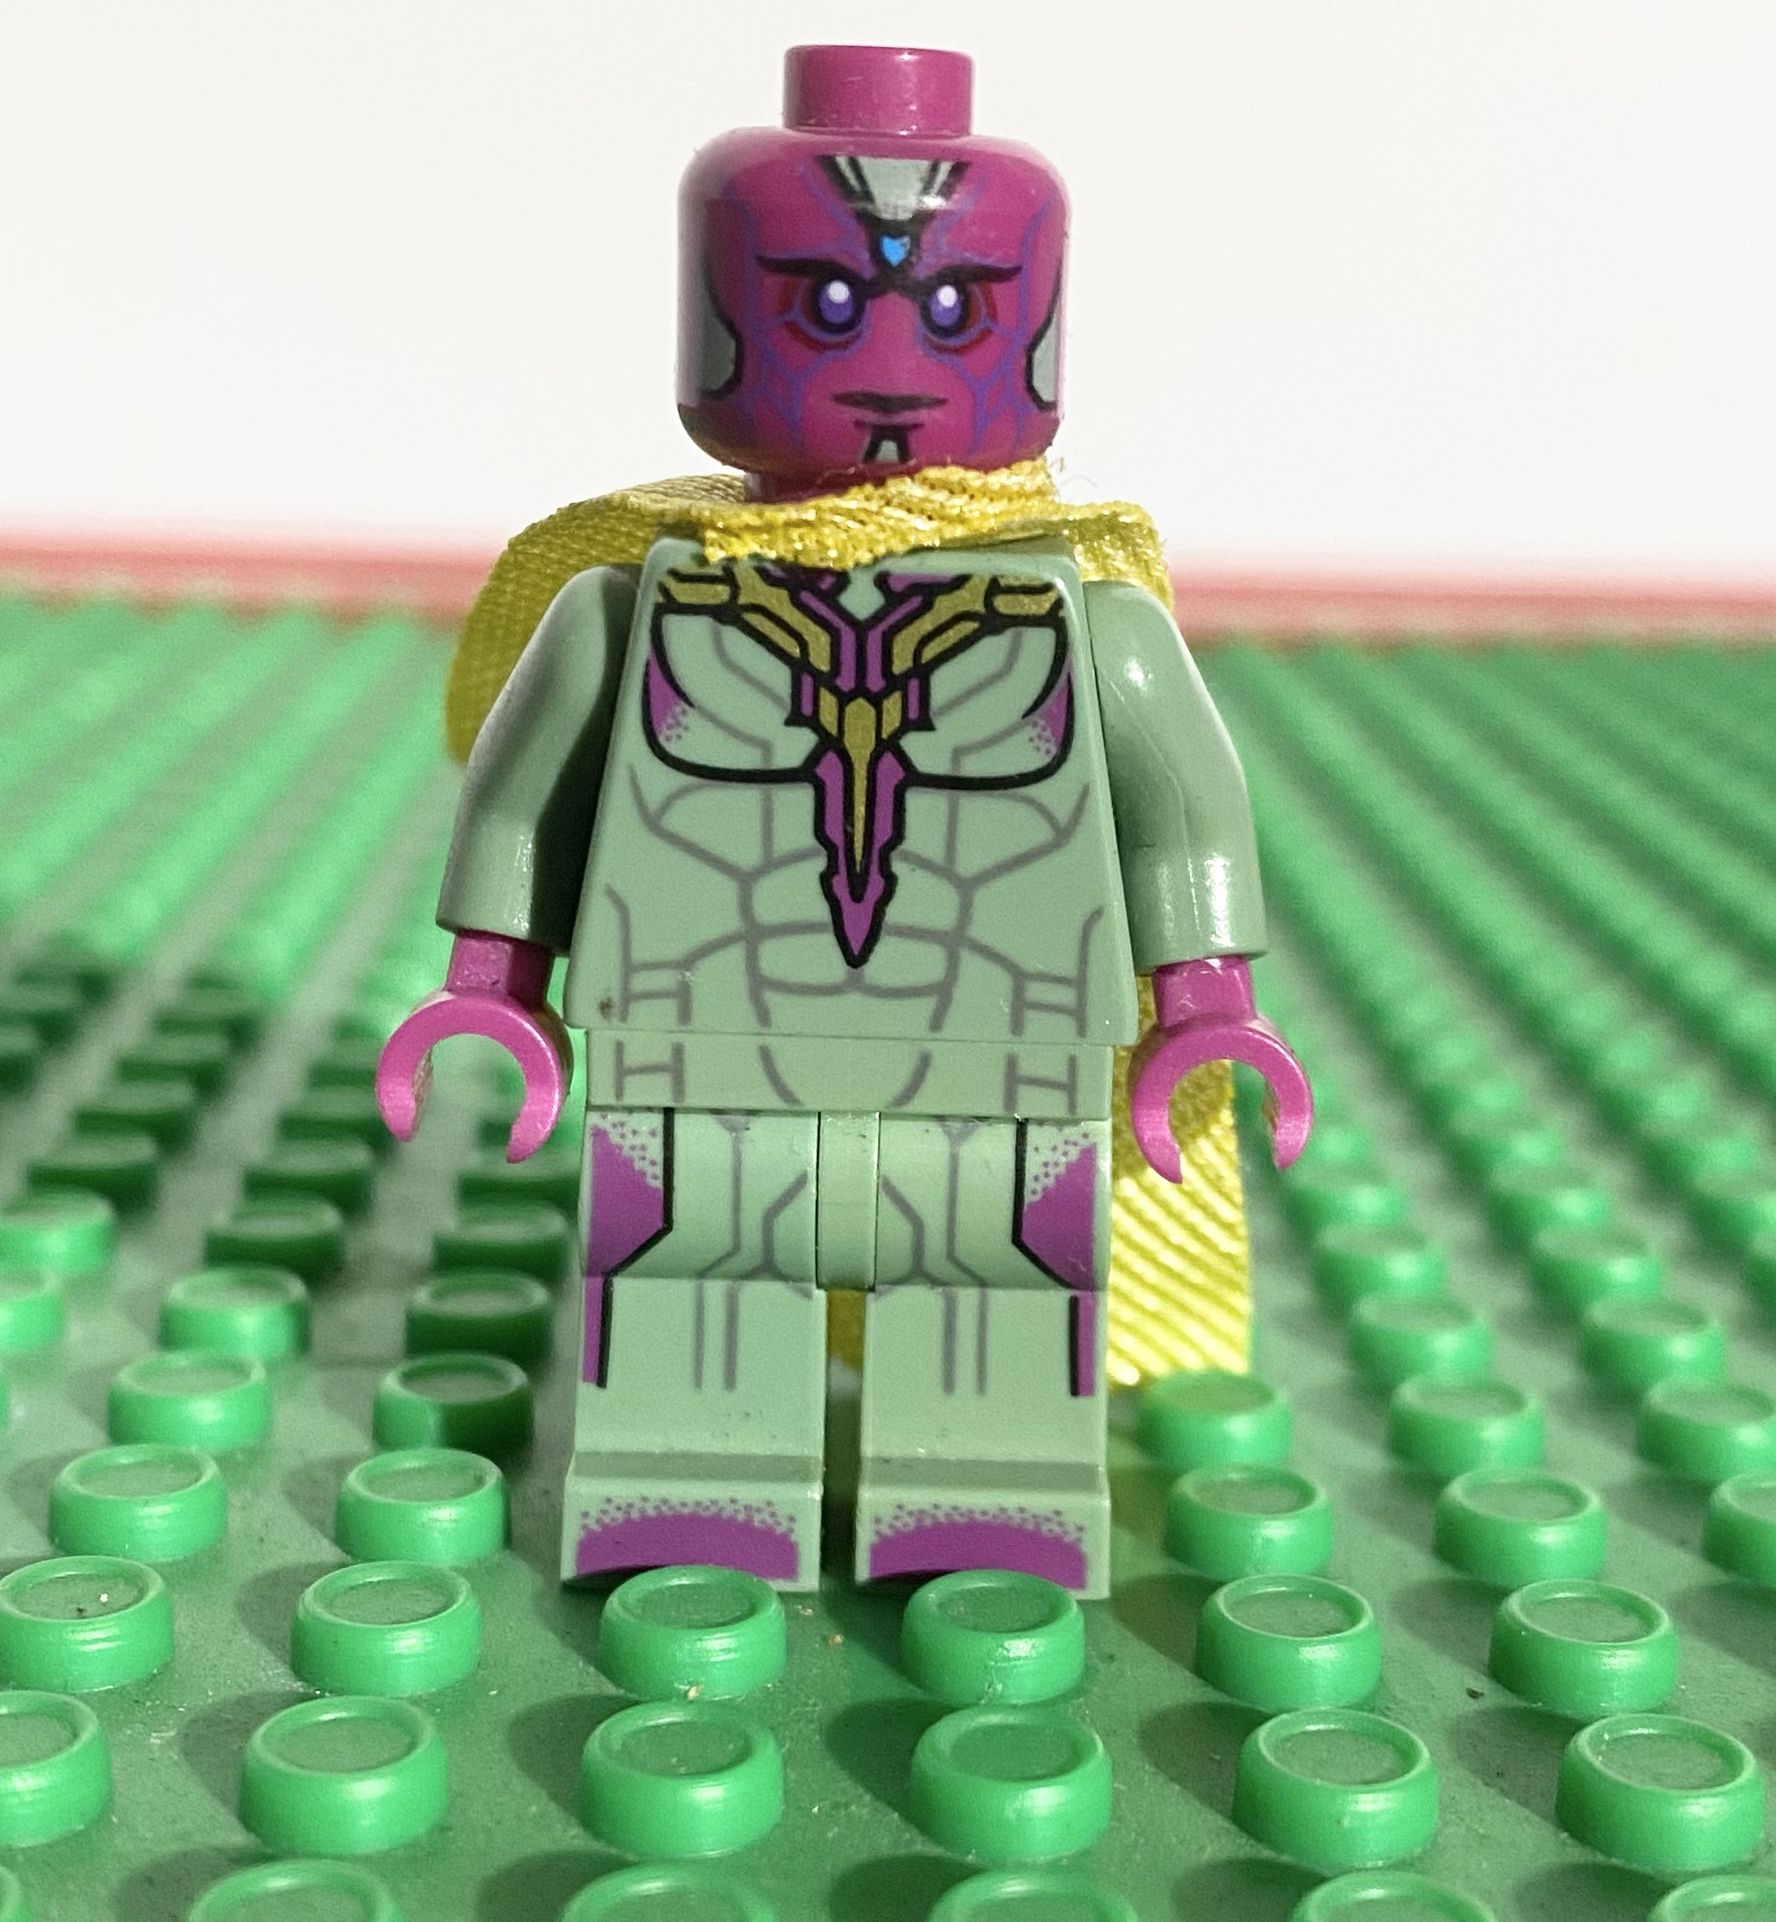 Uplifted Displacement slette Lego Marvel Avengers Vision Minifigure for Sale in Los Angeles, CA - OfferUp